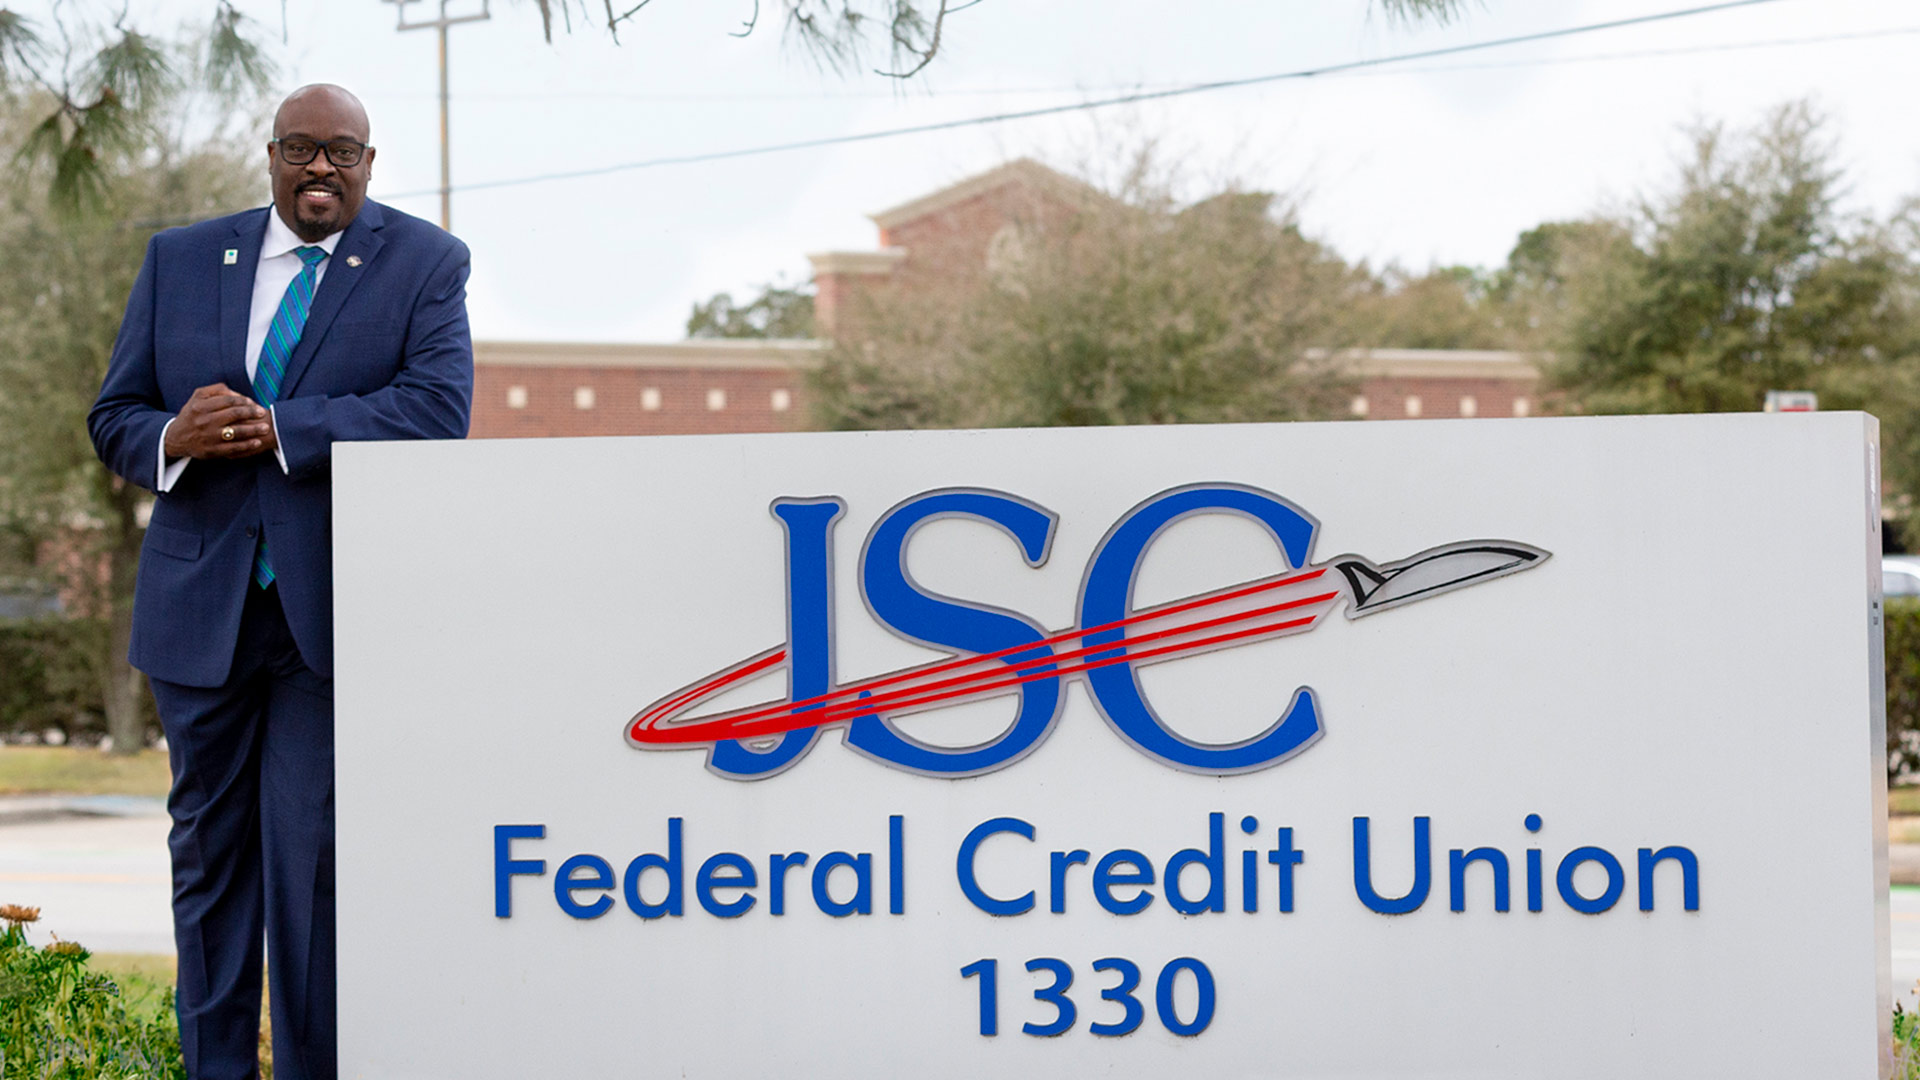 Busby with the JSC Federal Credit Union sign